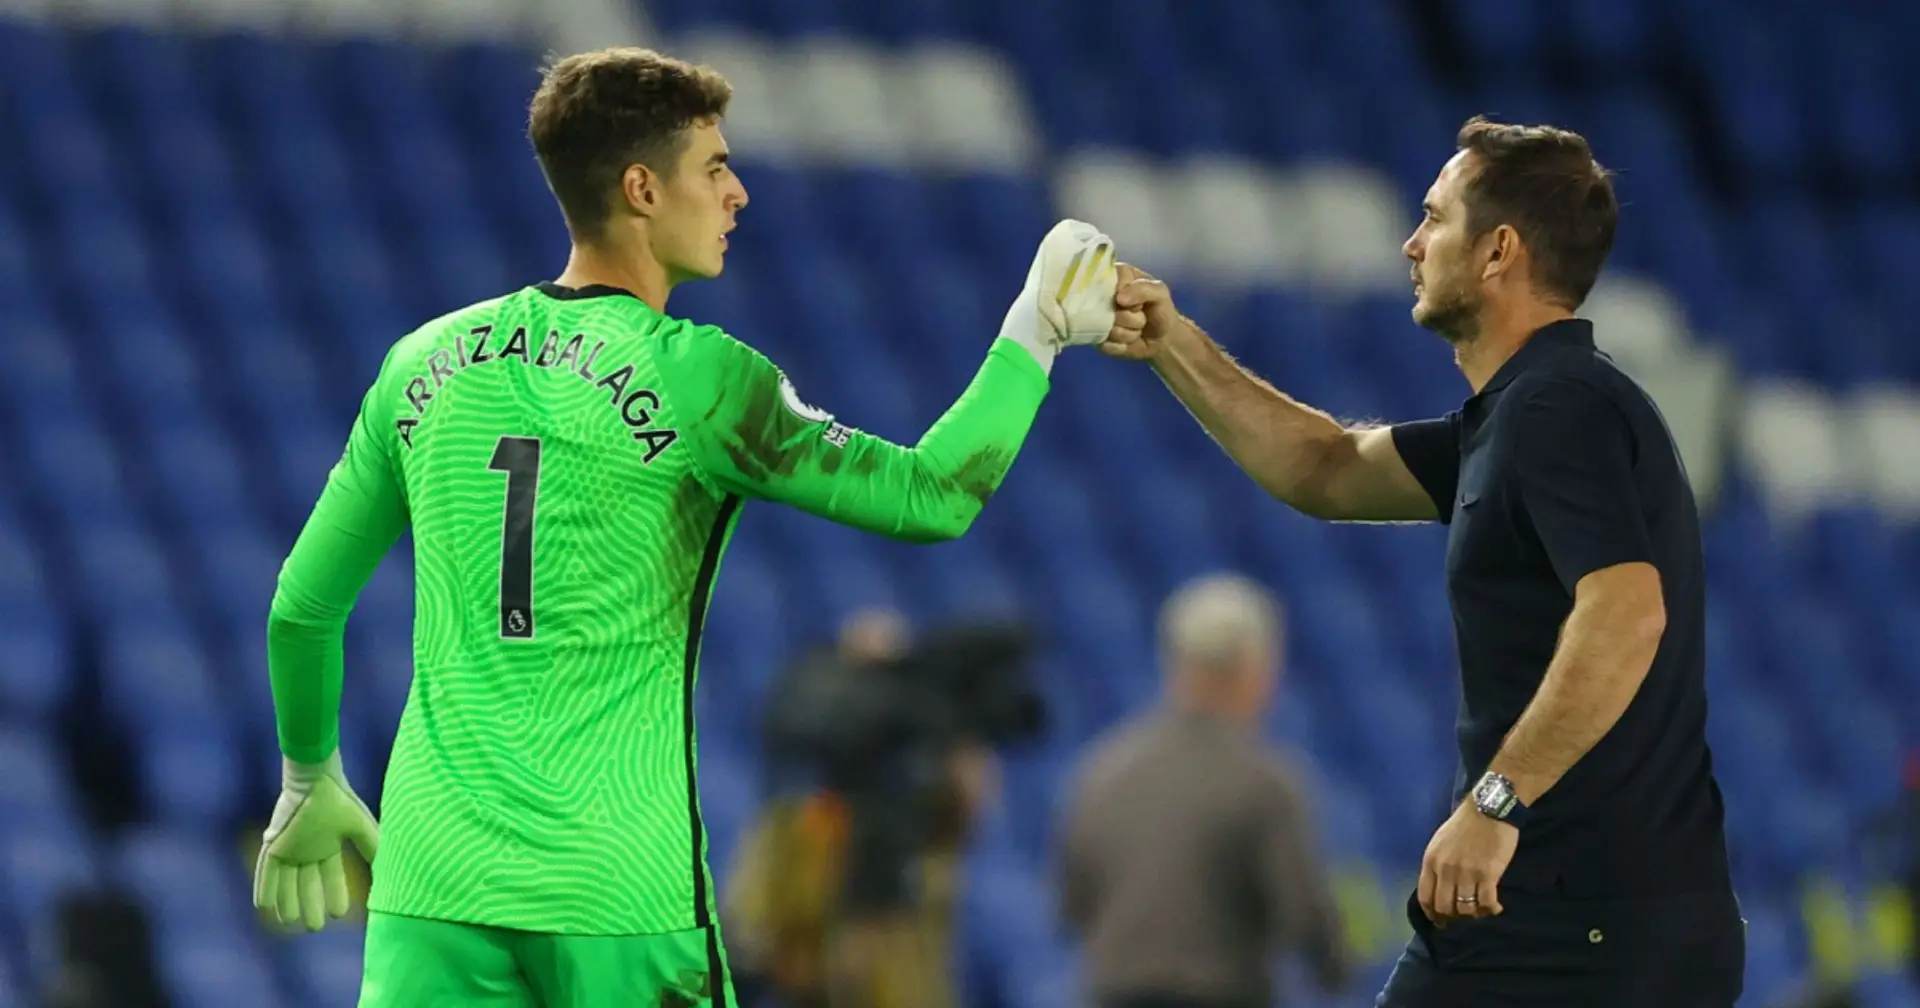 Kepa sets another unwelcome record following Brighton blunder